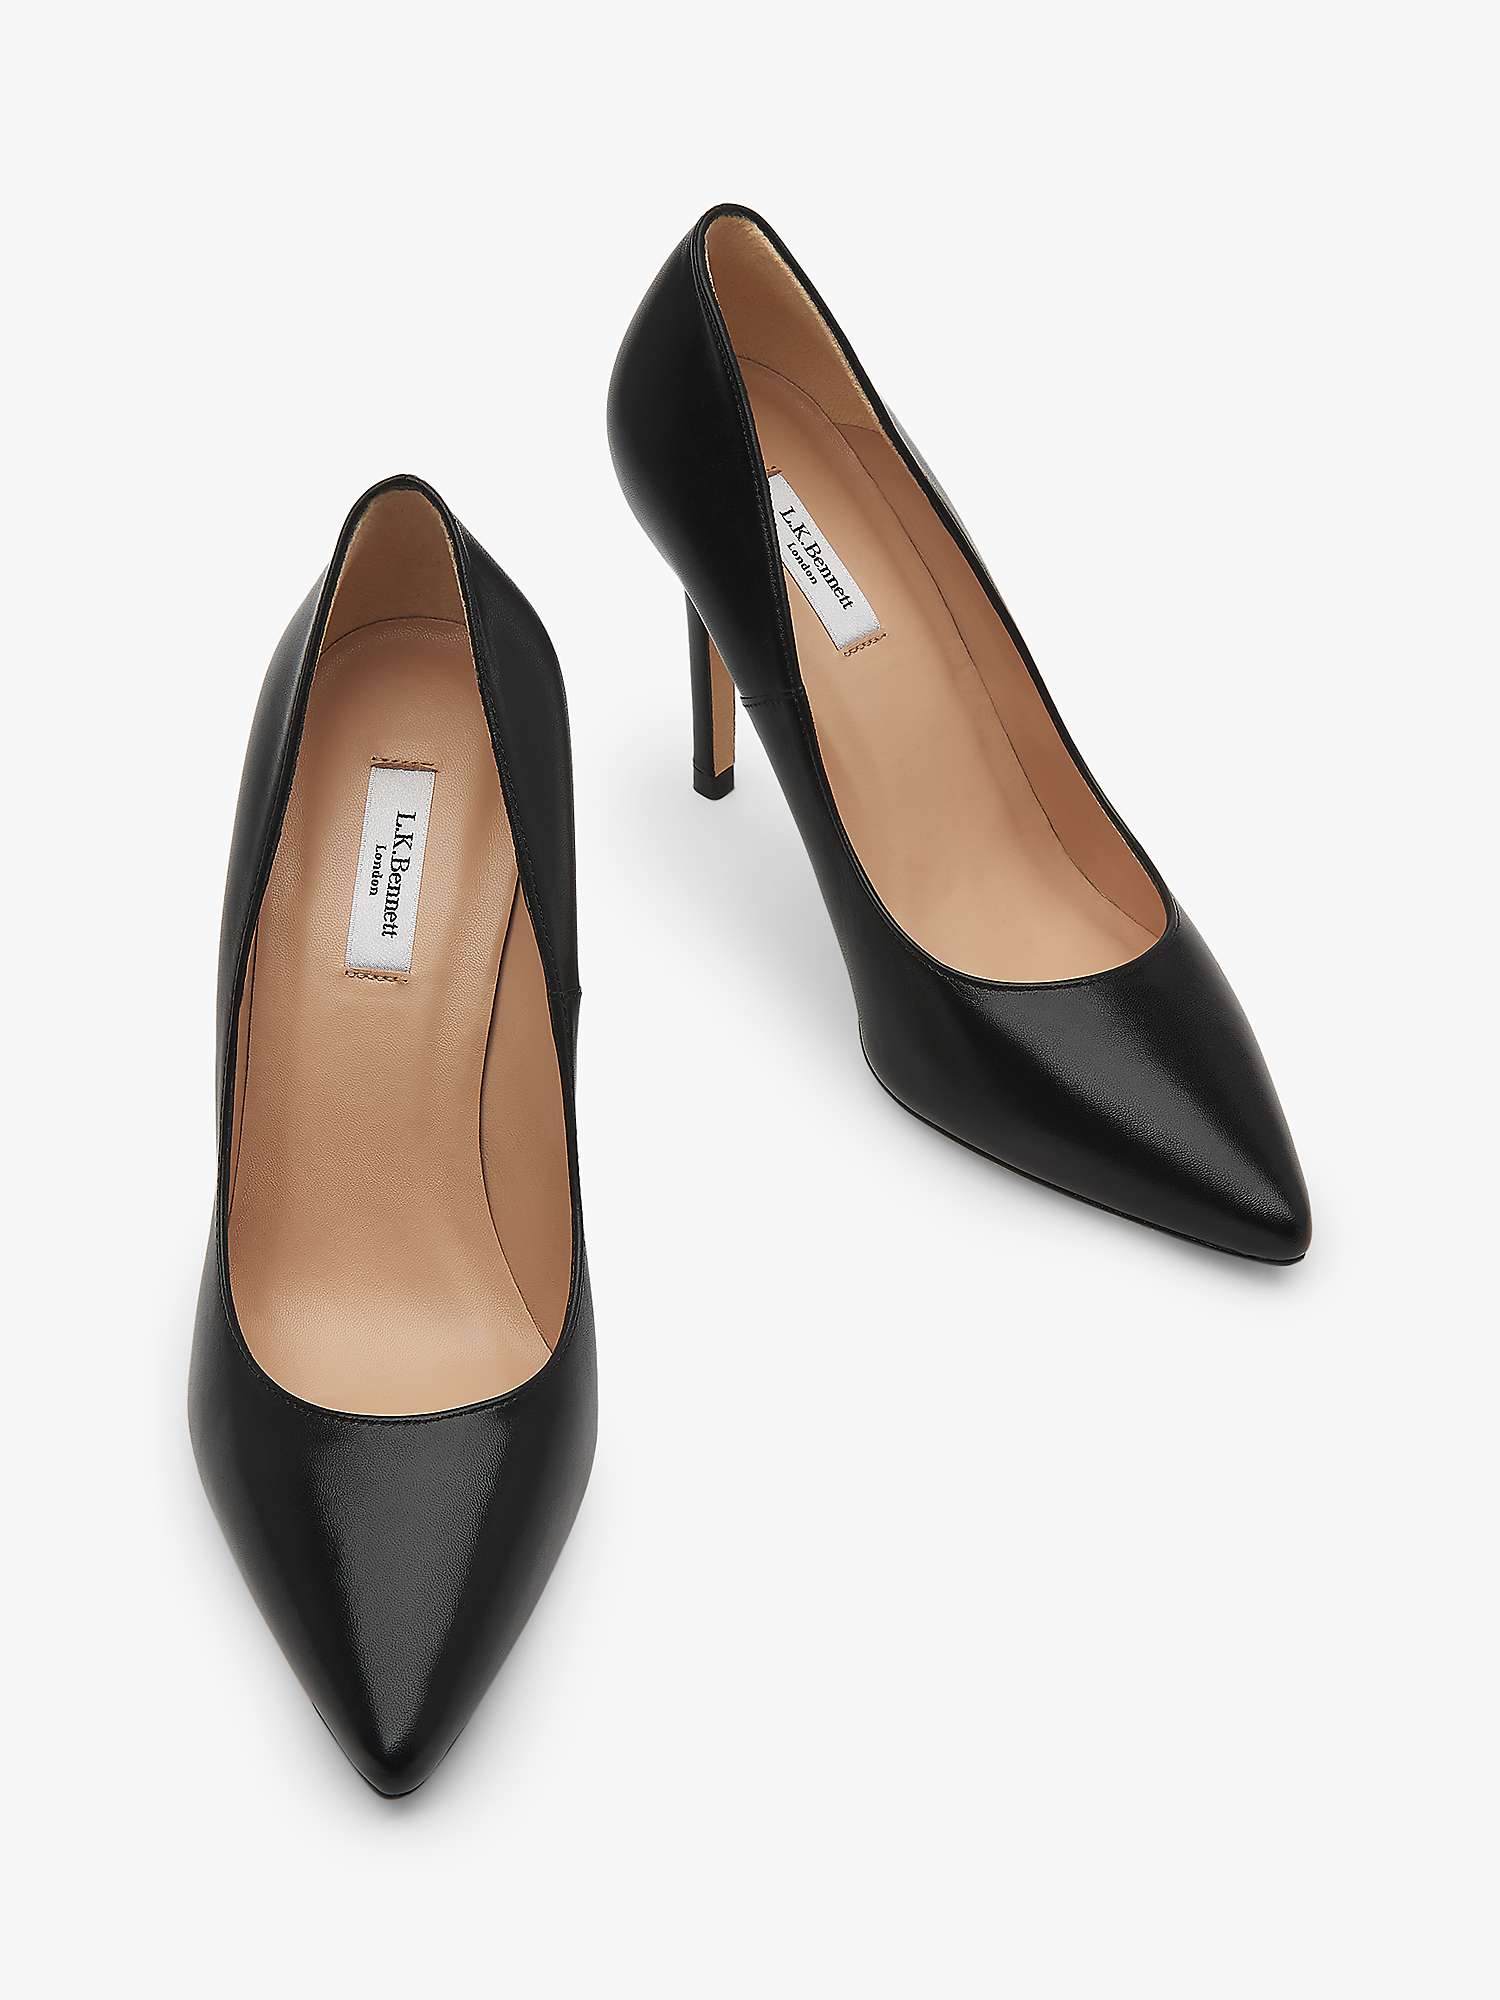 Buy L.K.Bennett Fern Pointed Toe Leather Court Shoes Online at johnlewis.com